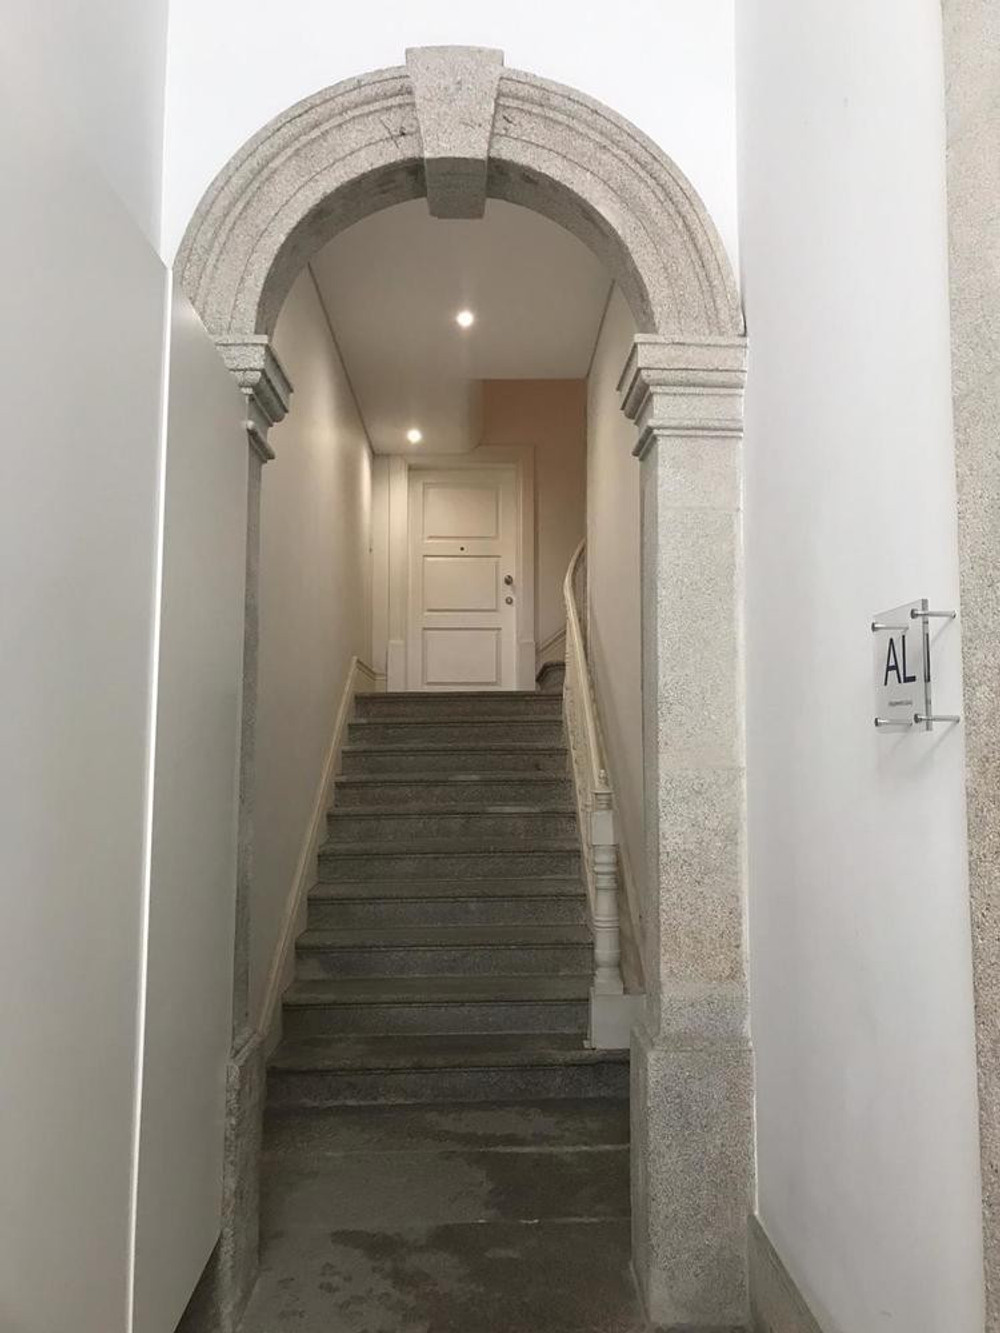 Beautiful Artsy Apartment for Rent-Porto downtown